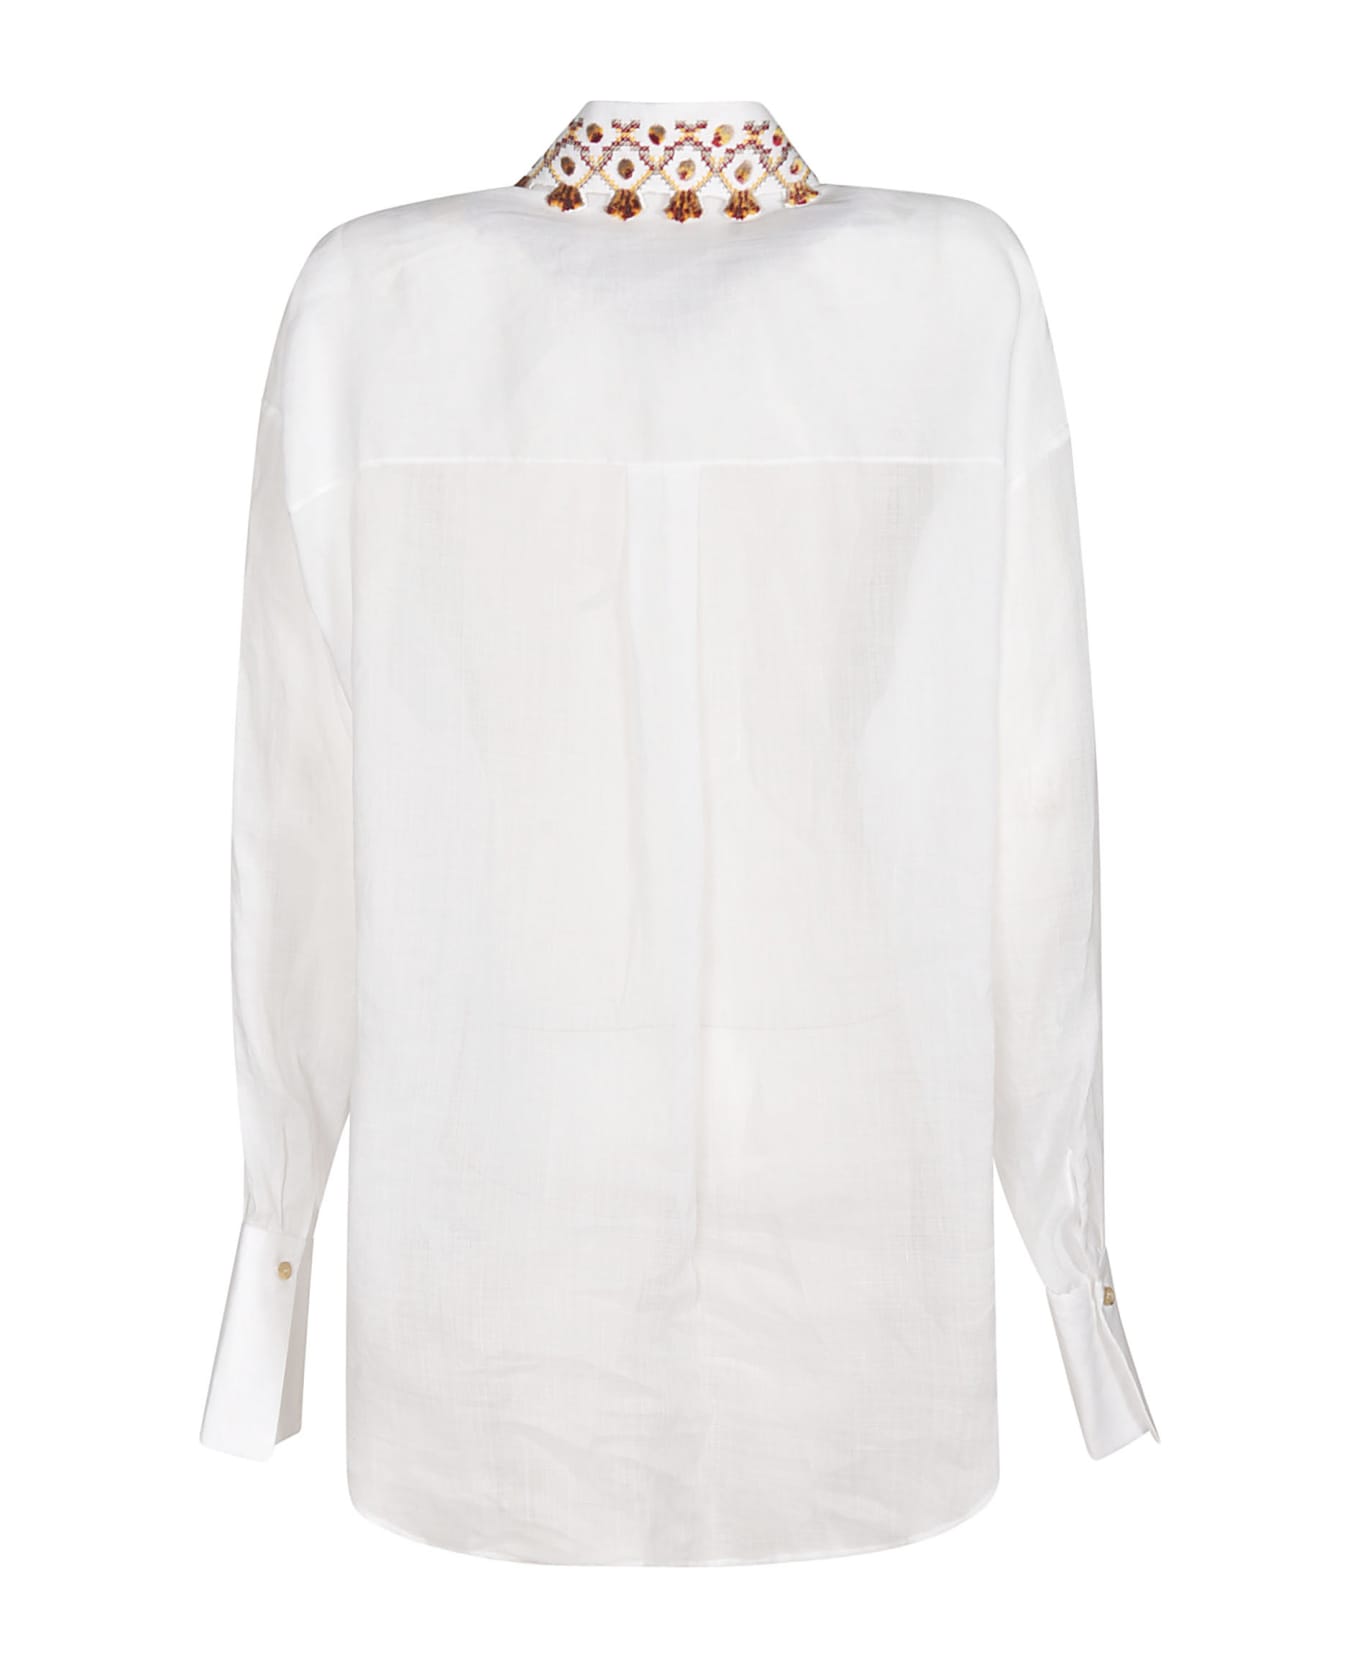 Ermanno Scervino Buttoned Long-sleeved Shirt - cream